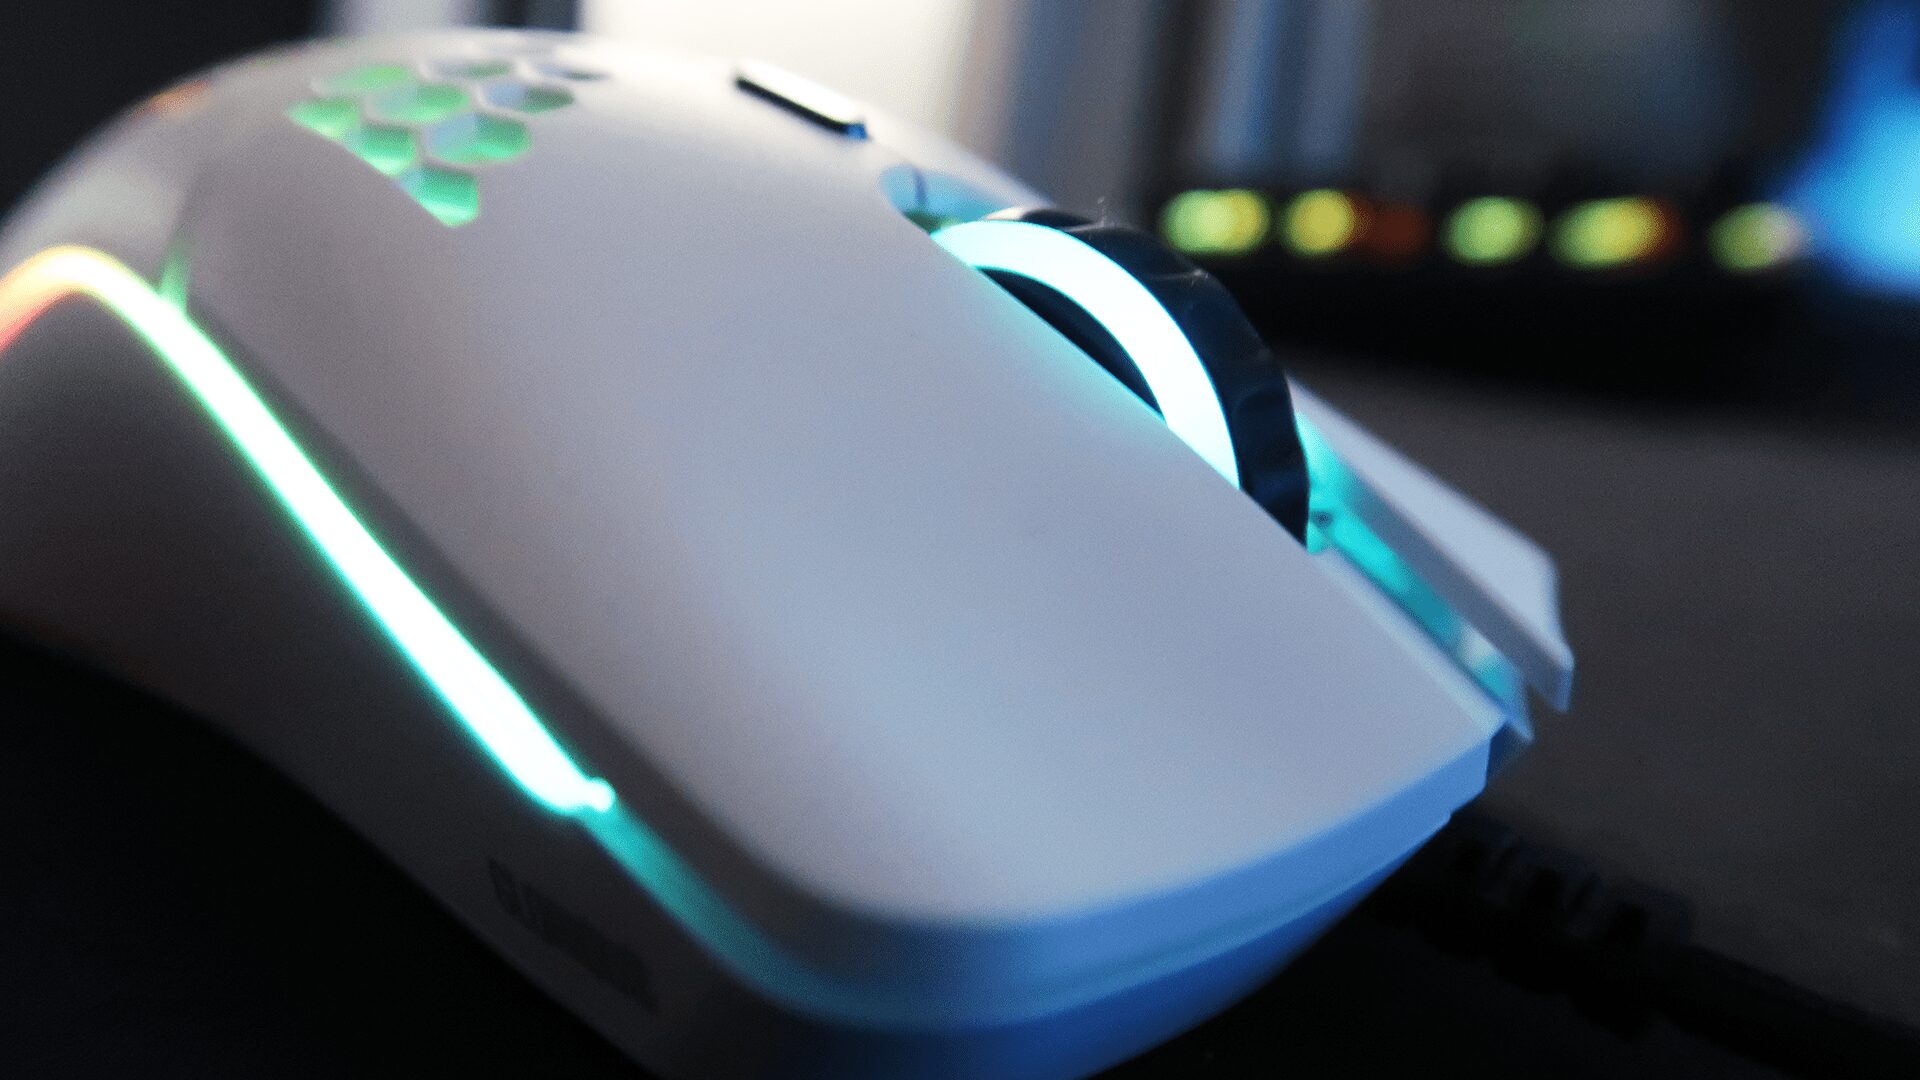 Does Your CPS Depend On Your Mouse When Gaming? 2021 Guide Digital Care